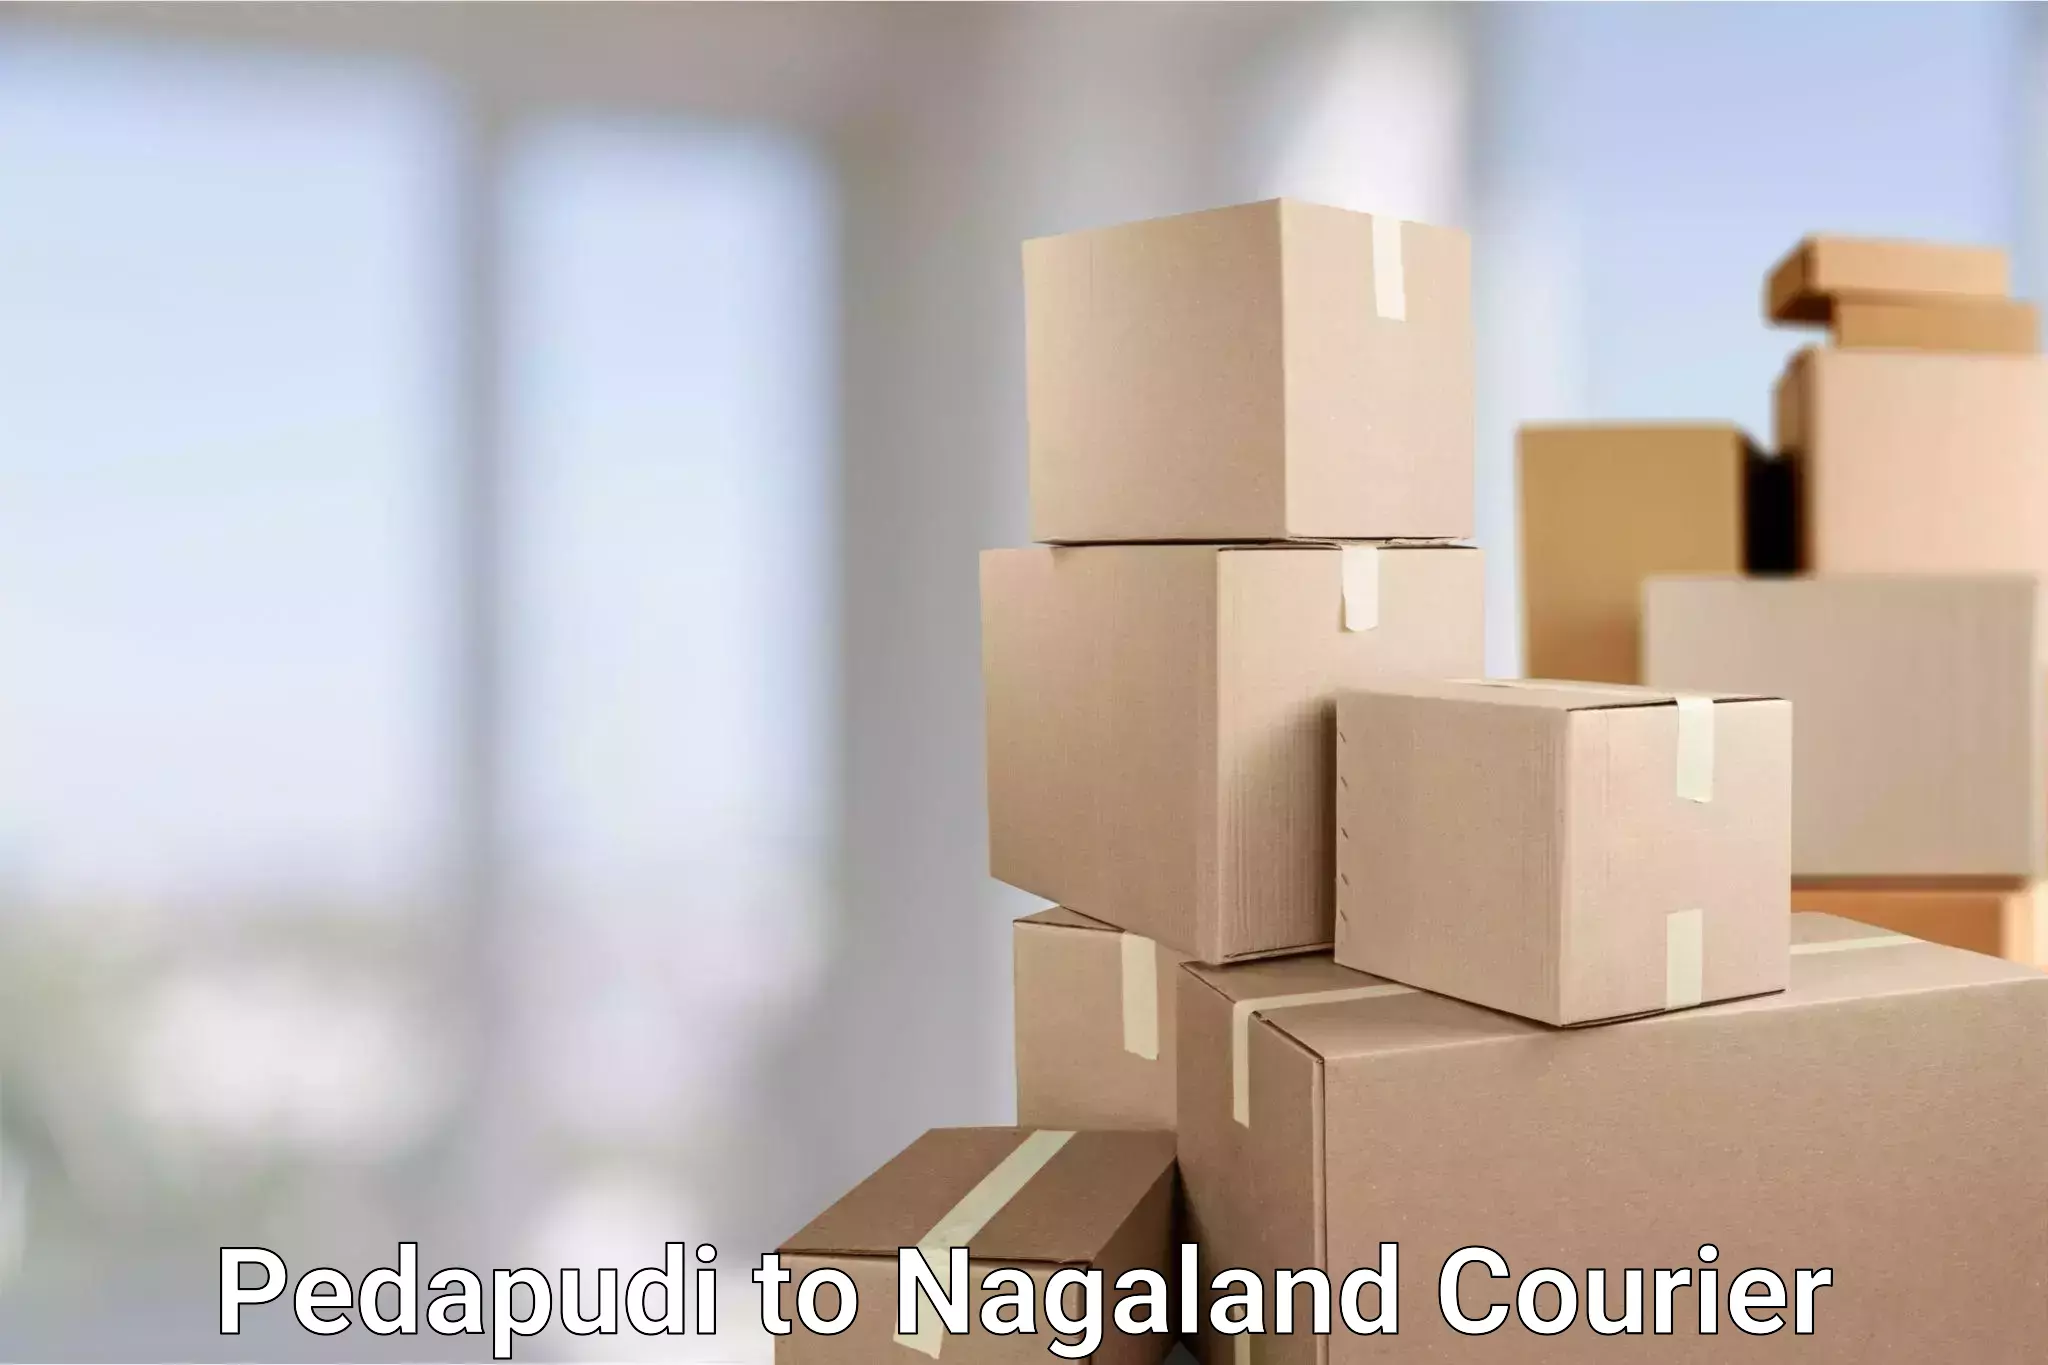 Comprehensive shipping network Pedapudi to Nagaland